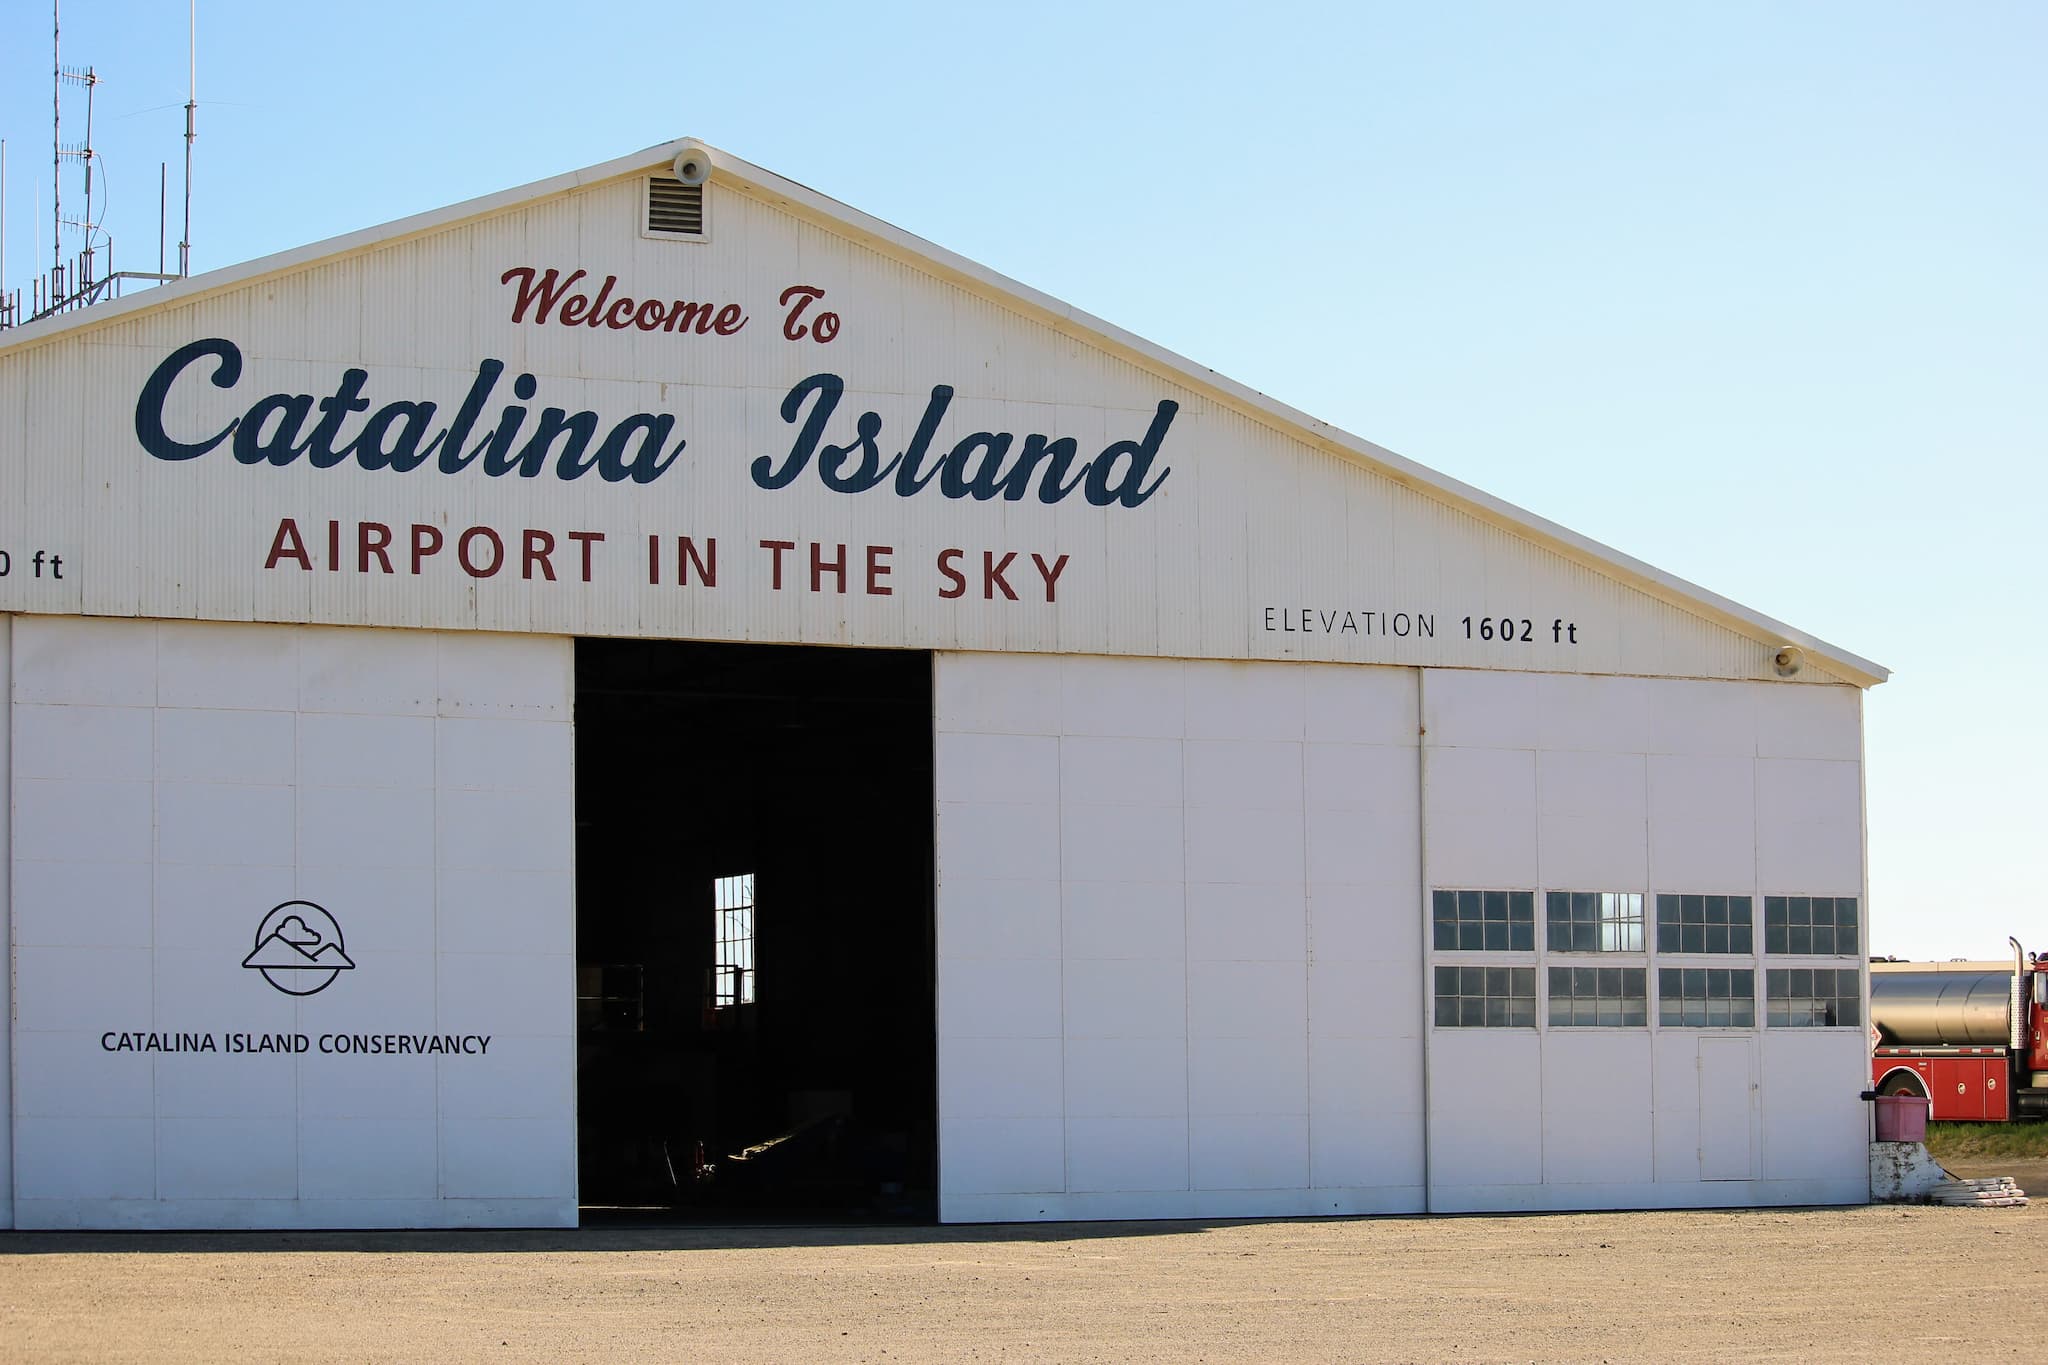 Airport hanger with the text 'Welcome to Catalina Island, Airport in the Sky'.